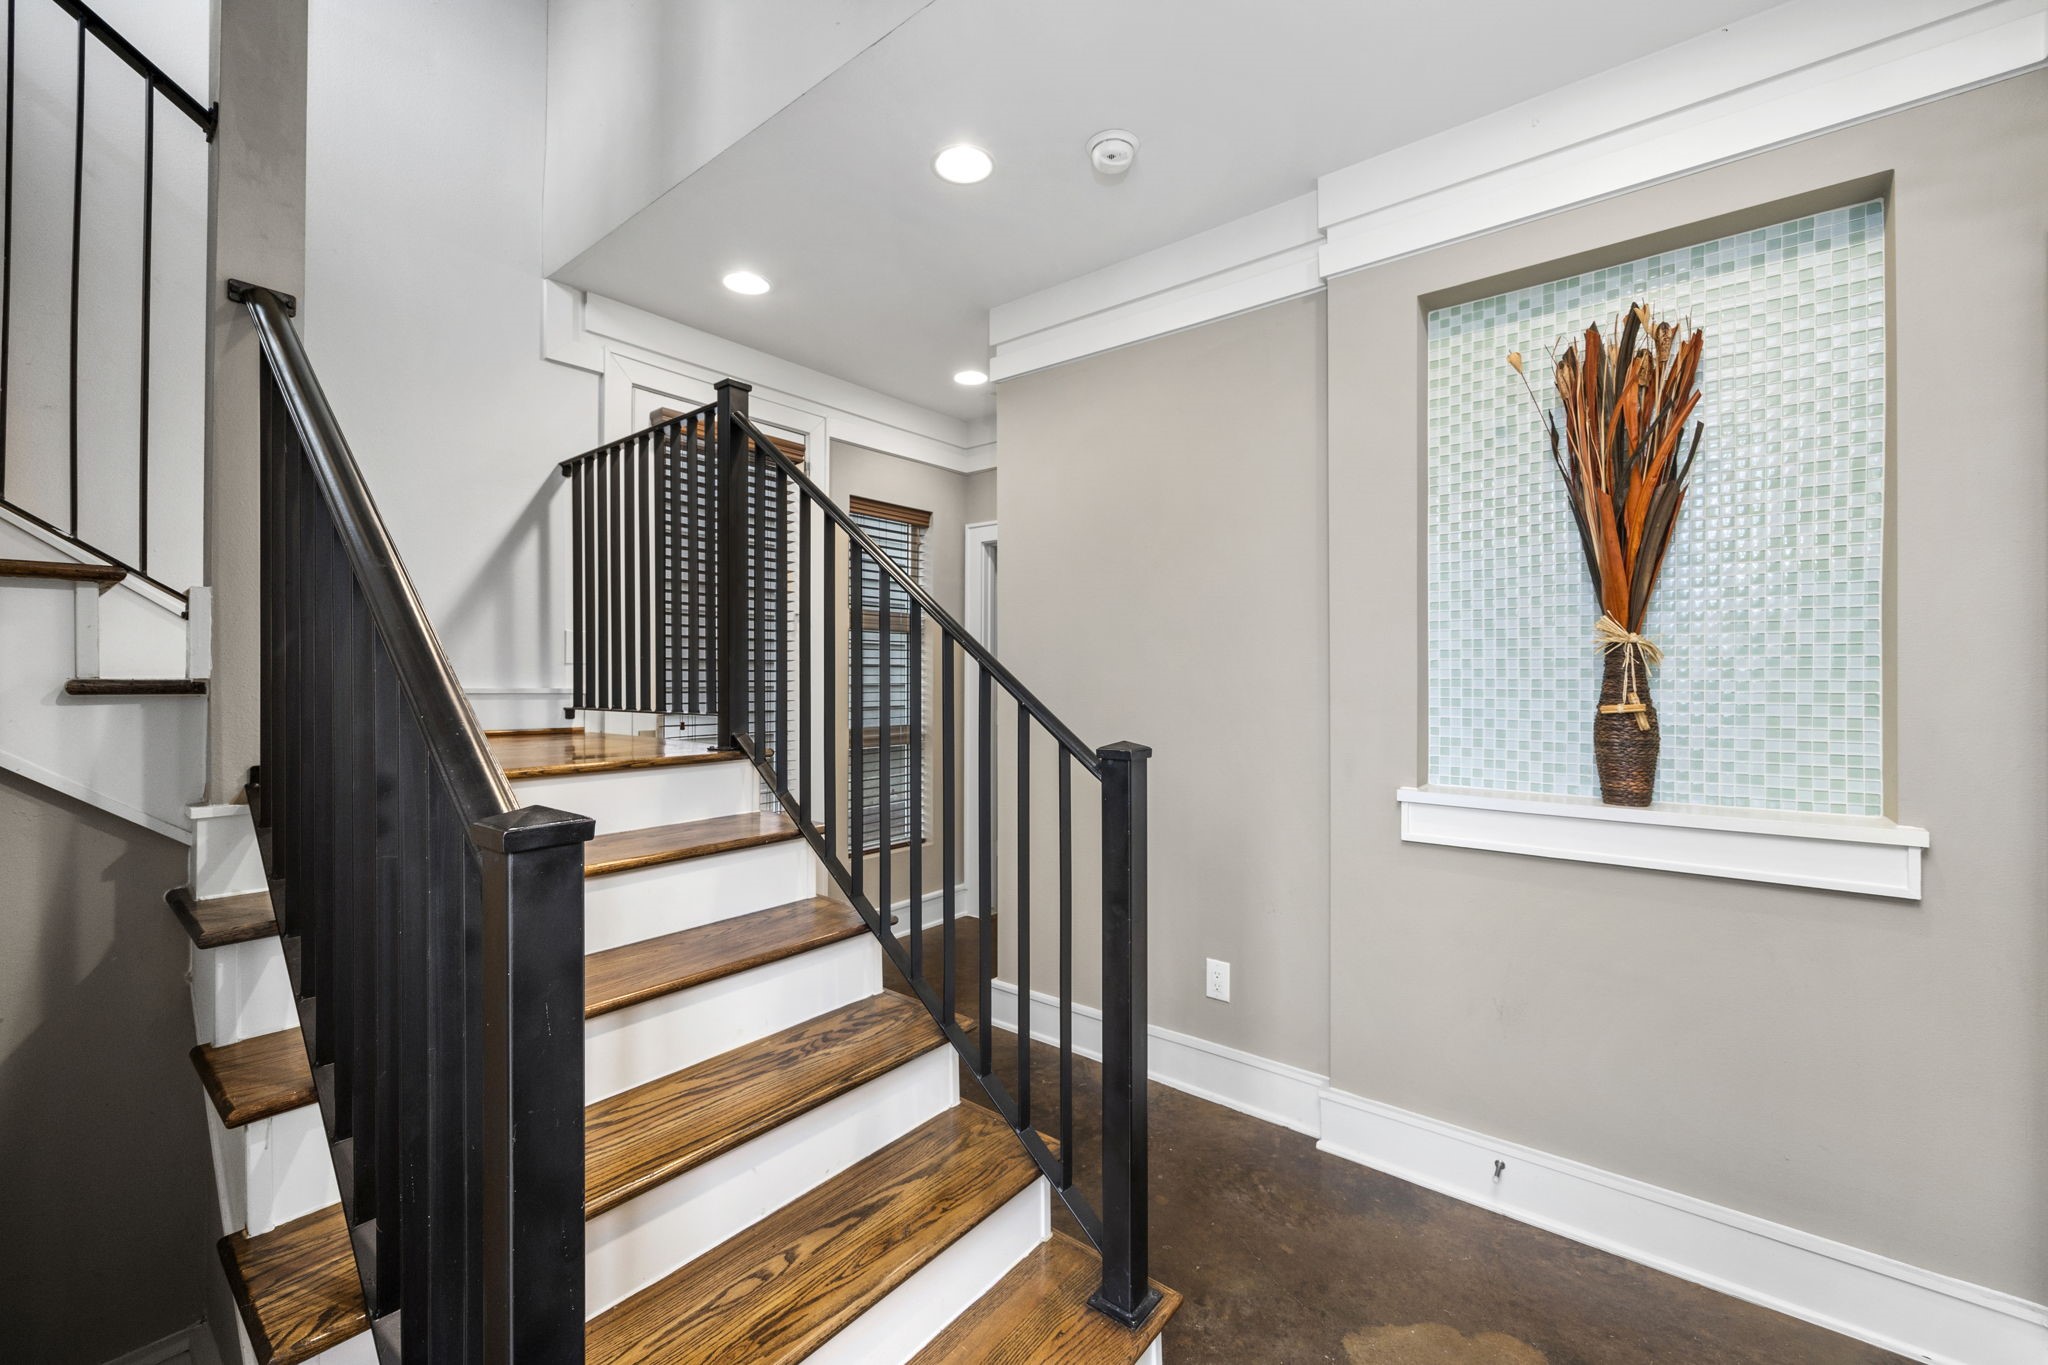 Grand Entry featuring a glass mosaic art niche & the wooden staircase w/wrought iron spindles, modern concrete flooring throughout the 1st Floor. 322 Patterson St., Houston, TX  77007